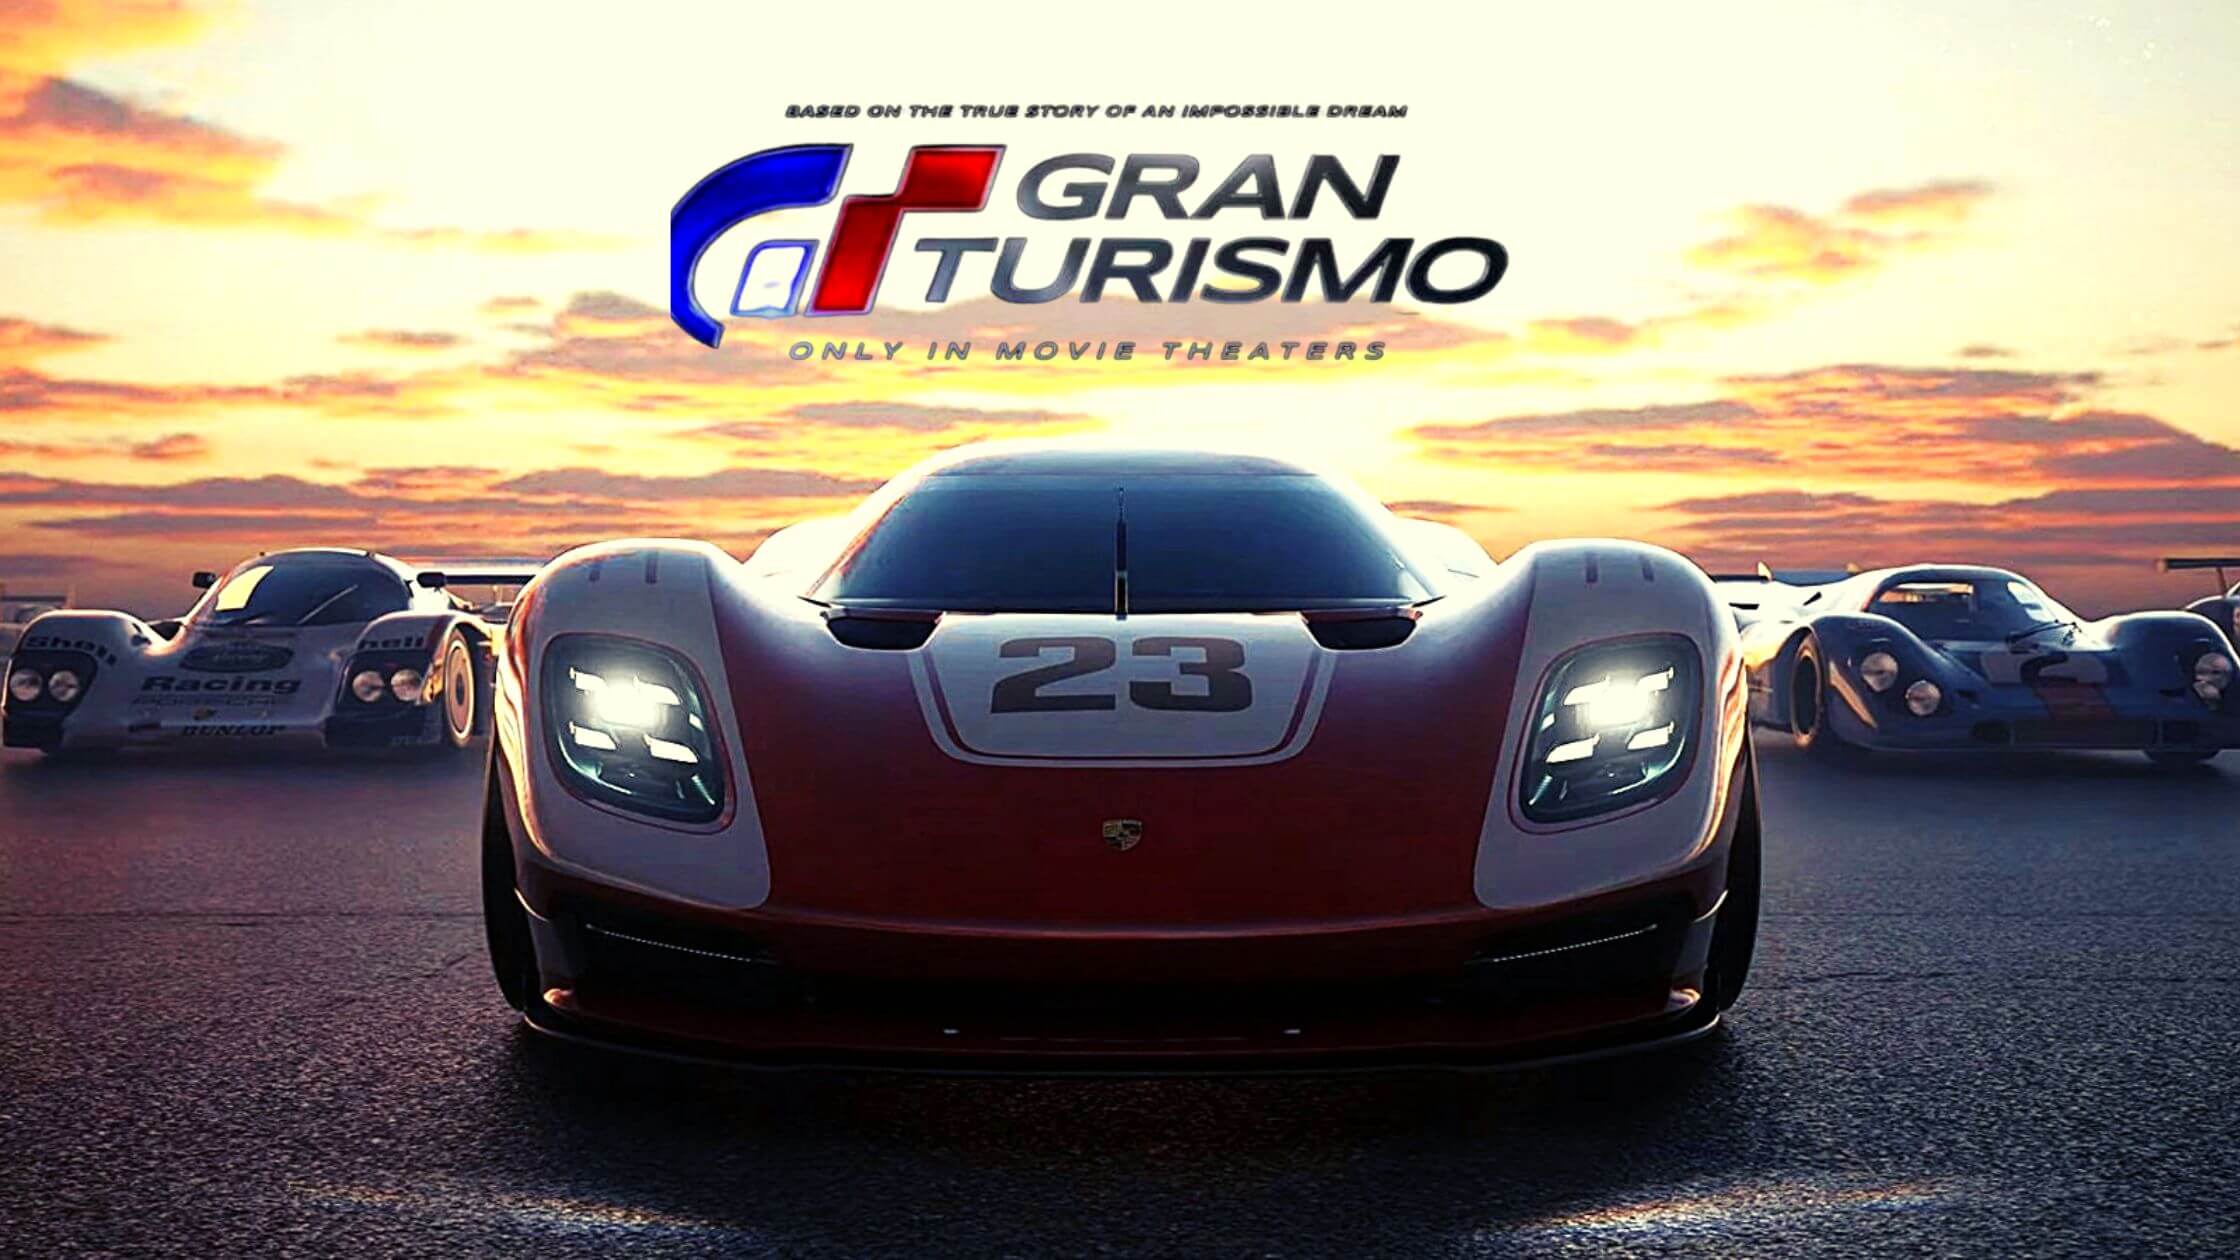 Sony Releases A Sneak Preview Of The Film Gran Turismo At CES 2023